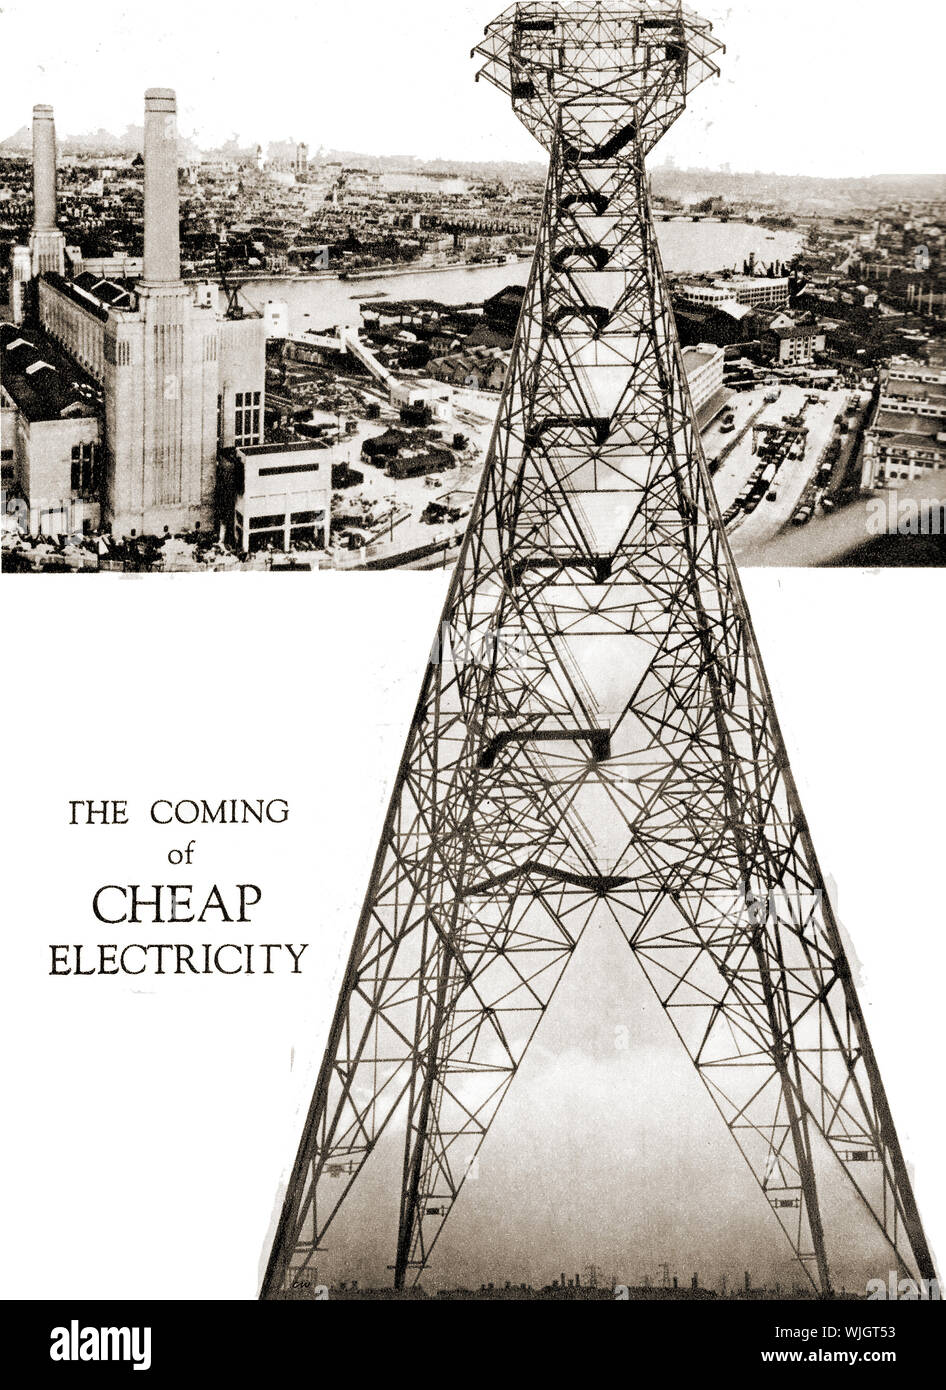 1934 Britain announced the coming of cheap electricity, This old magazine page shows a power station  ( The then newly constructed Battersea Power Station, London near the Thames)and an electricity pylon shortly  after the Government supported the  Electricity (Supply) Bill. Designer Leonard Pearce, architects  J Theo Halliday and Giles Gilbert Scott. Stock Photo